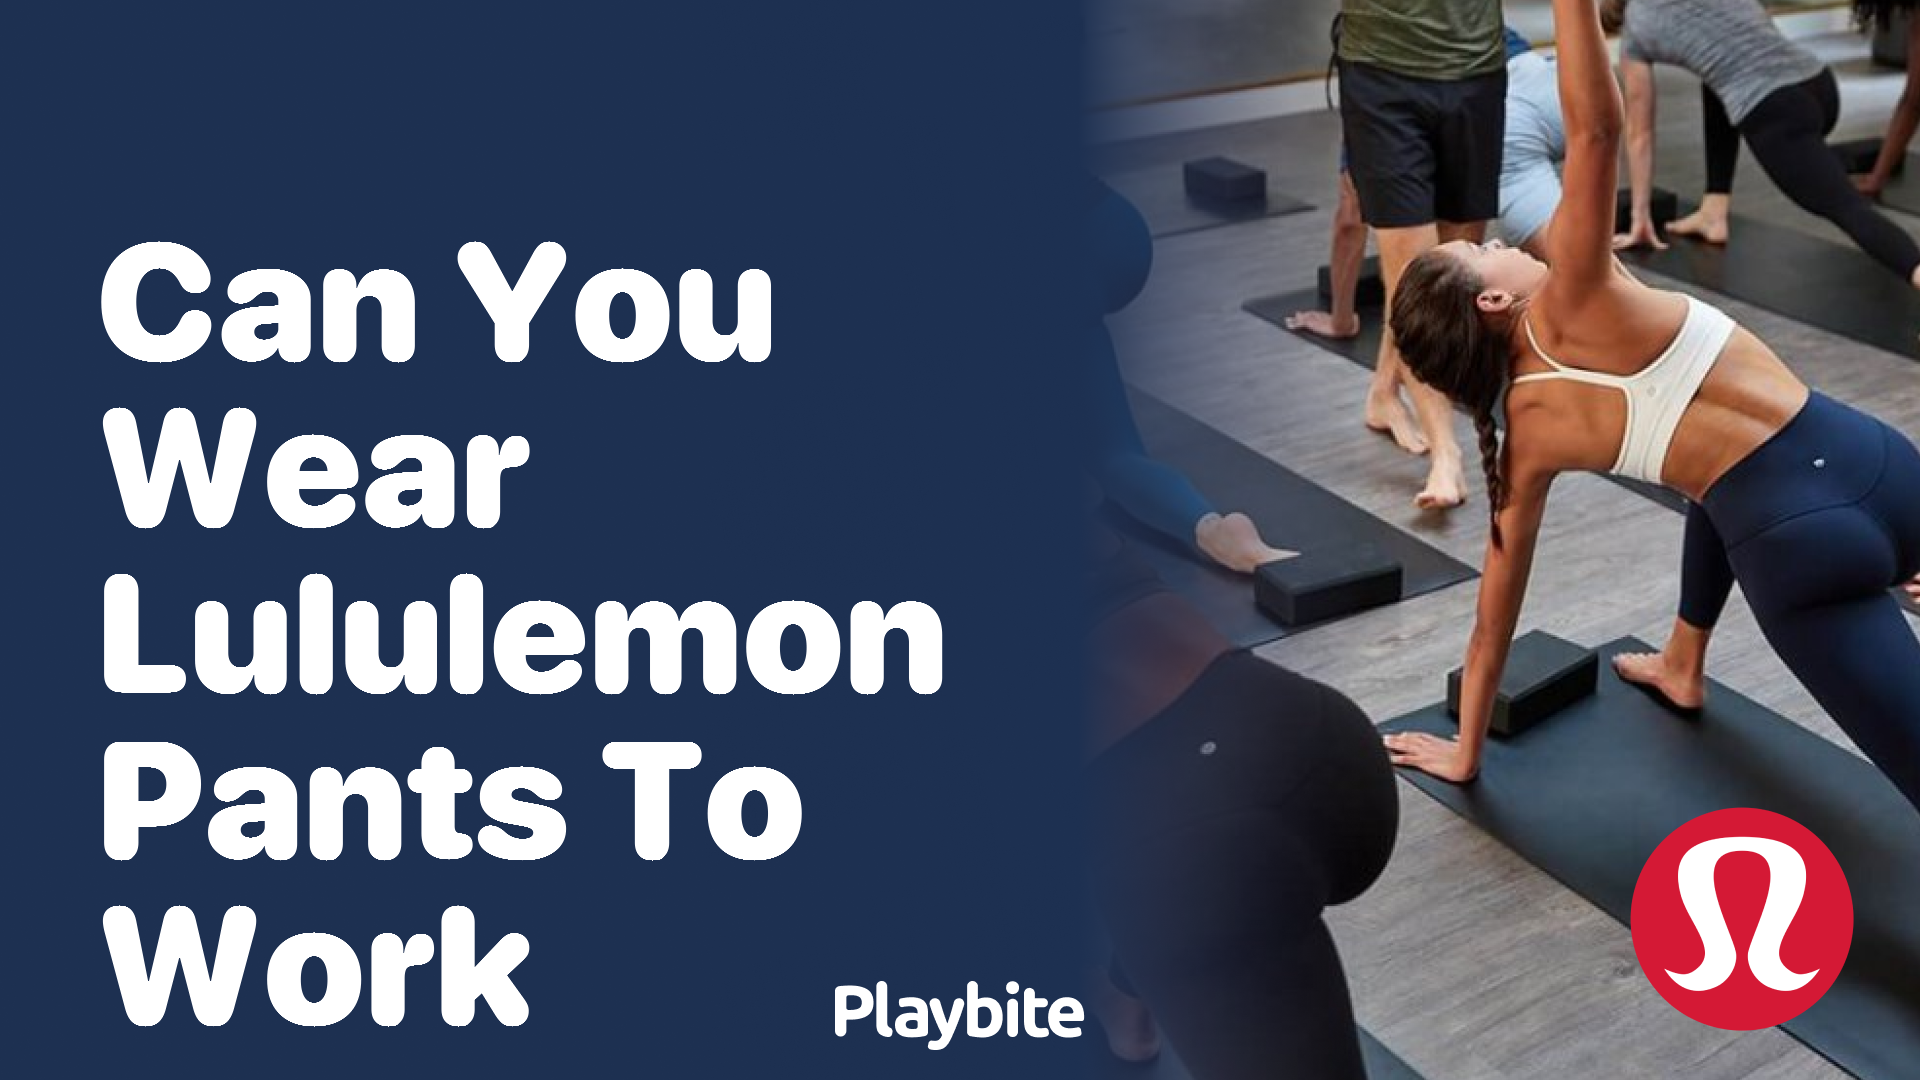 Can You Wear Lululemon Pants to Work? - Playbite